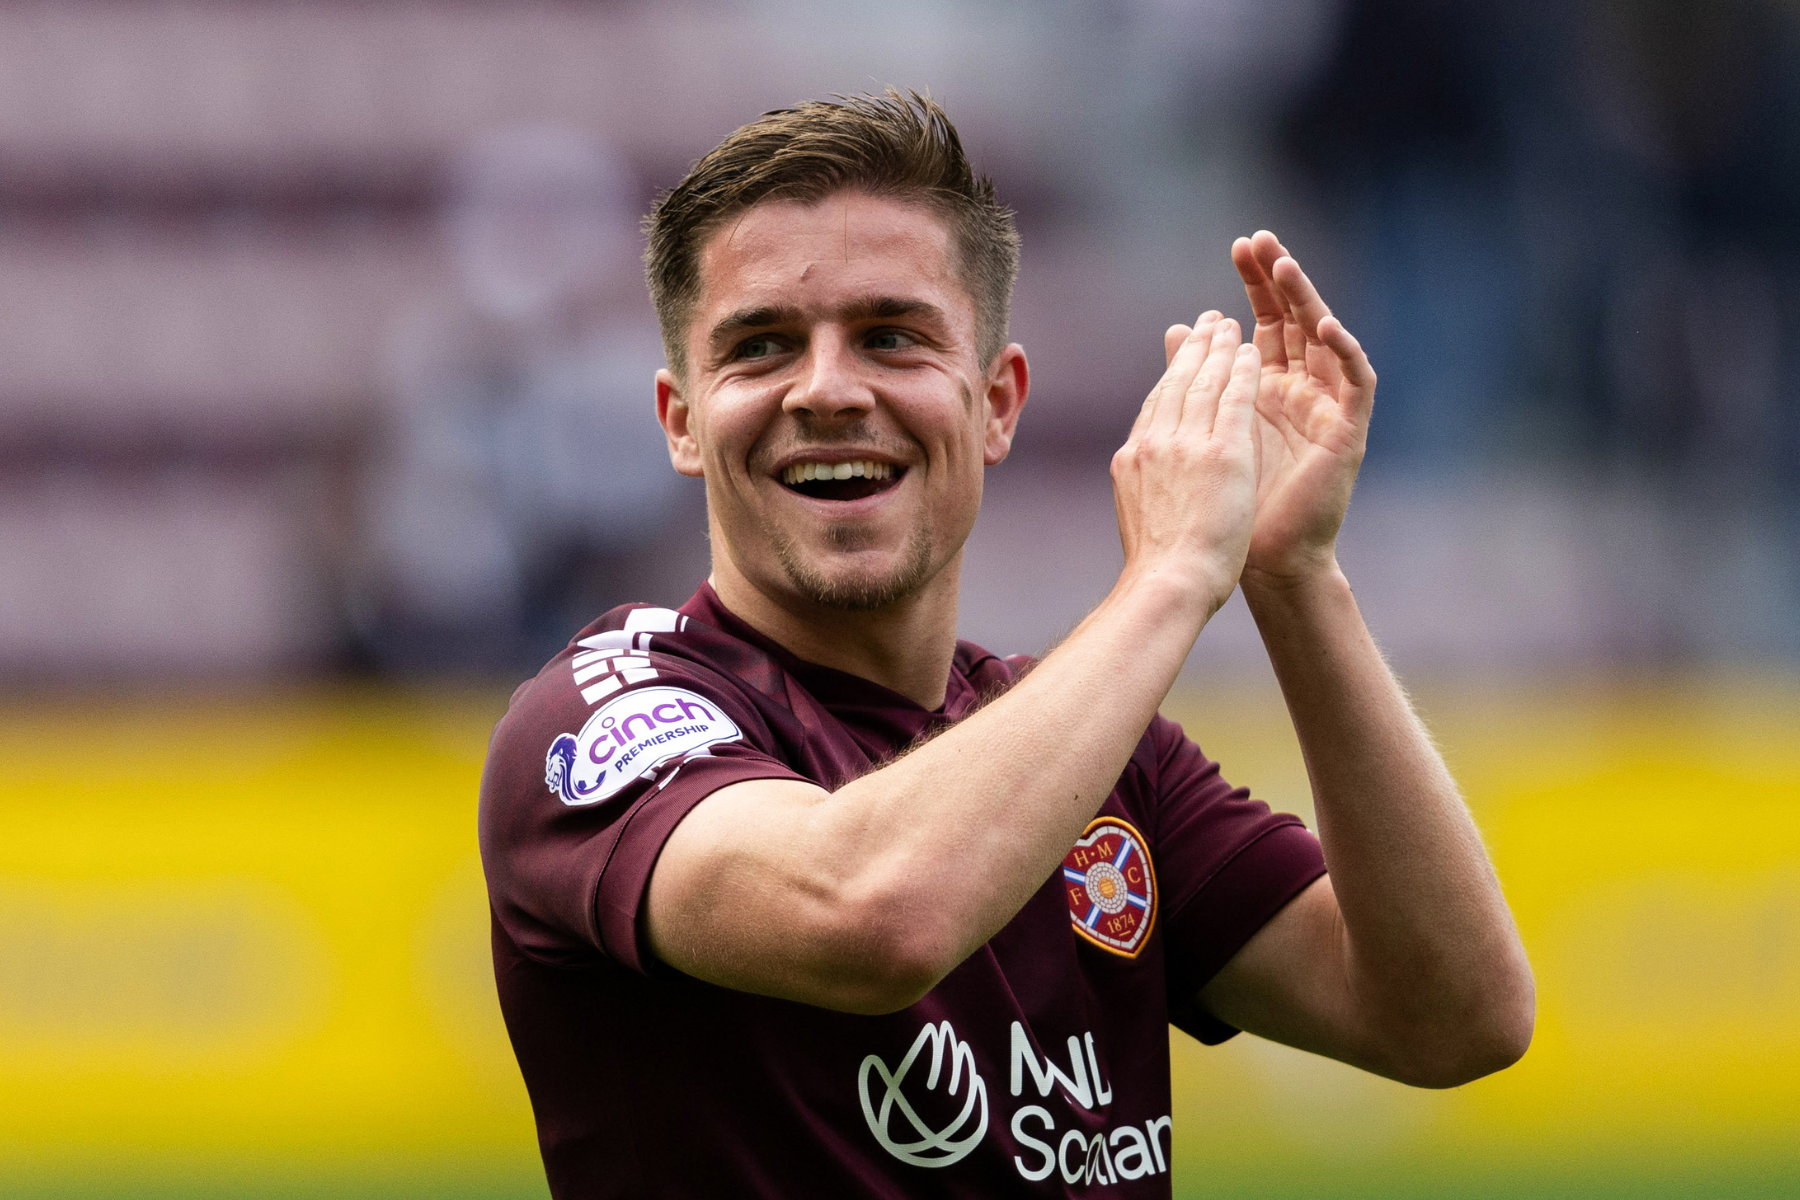 Hearts confirm extension of Cammy Devlin's contract